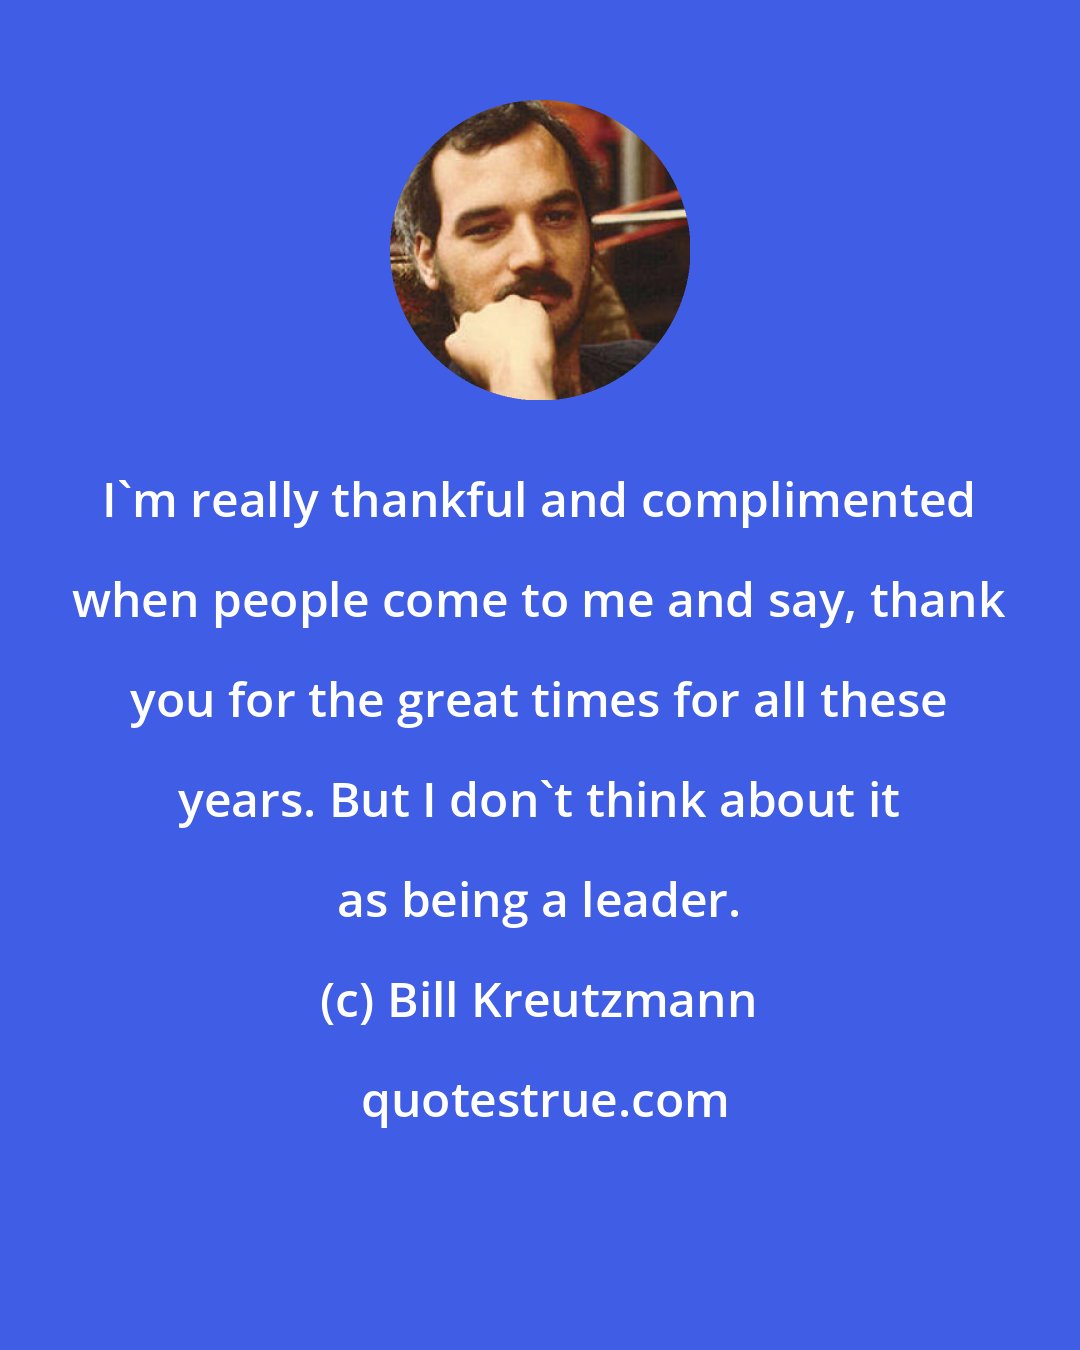 Bill Kreutzmann: I'm really thankful and complimented when people come to me and say, thank you for the great times for all these years. But I don't think about it as being a leader.